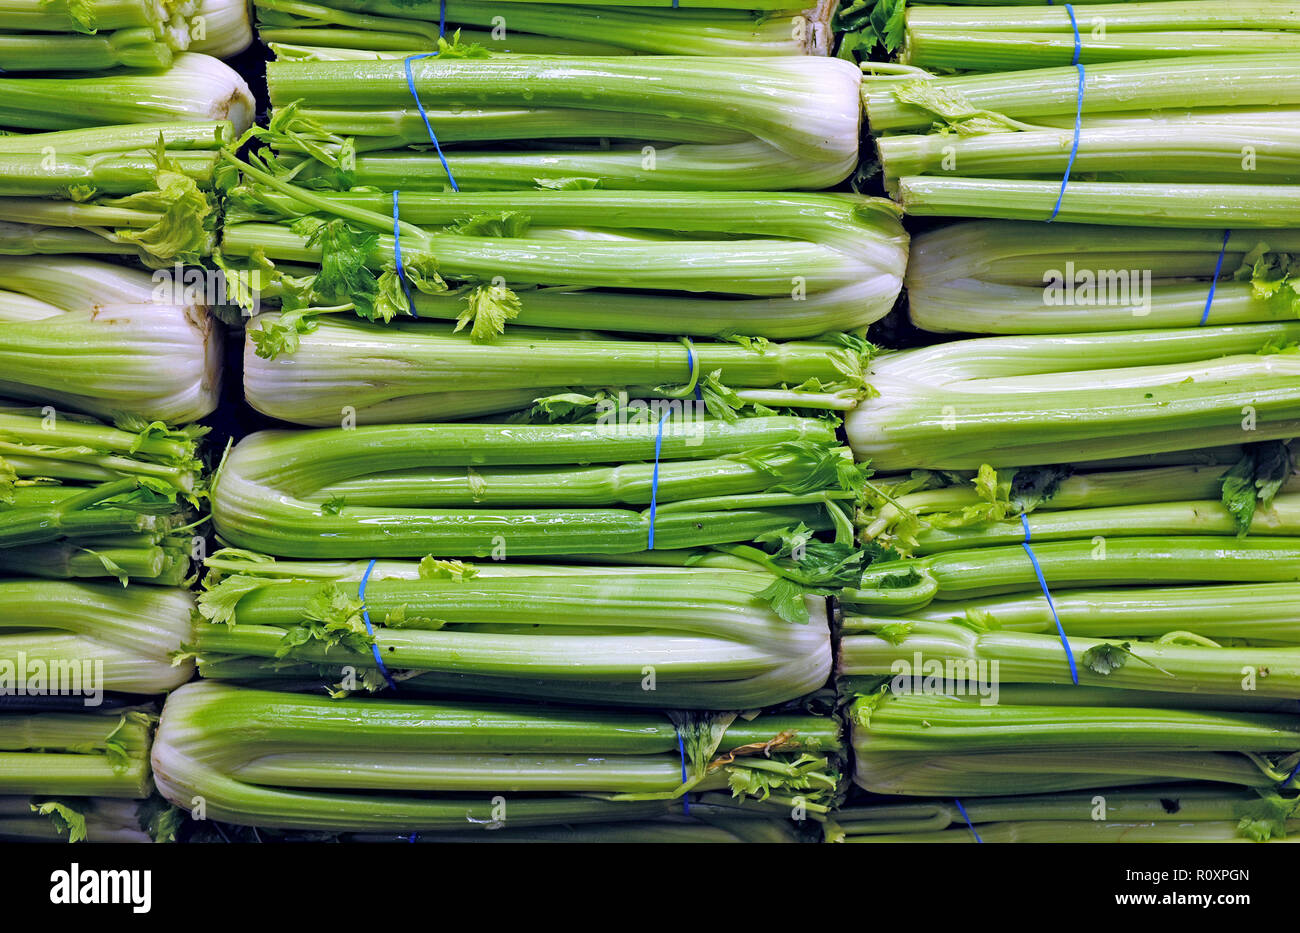 Bunches of crisp wet celery, apium gravedlens, is stacked on display in a US grocery store. Stock Photo